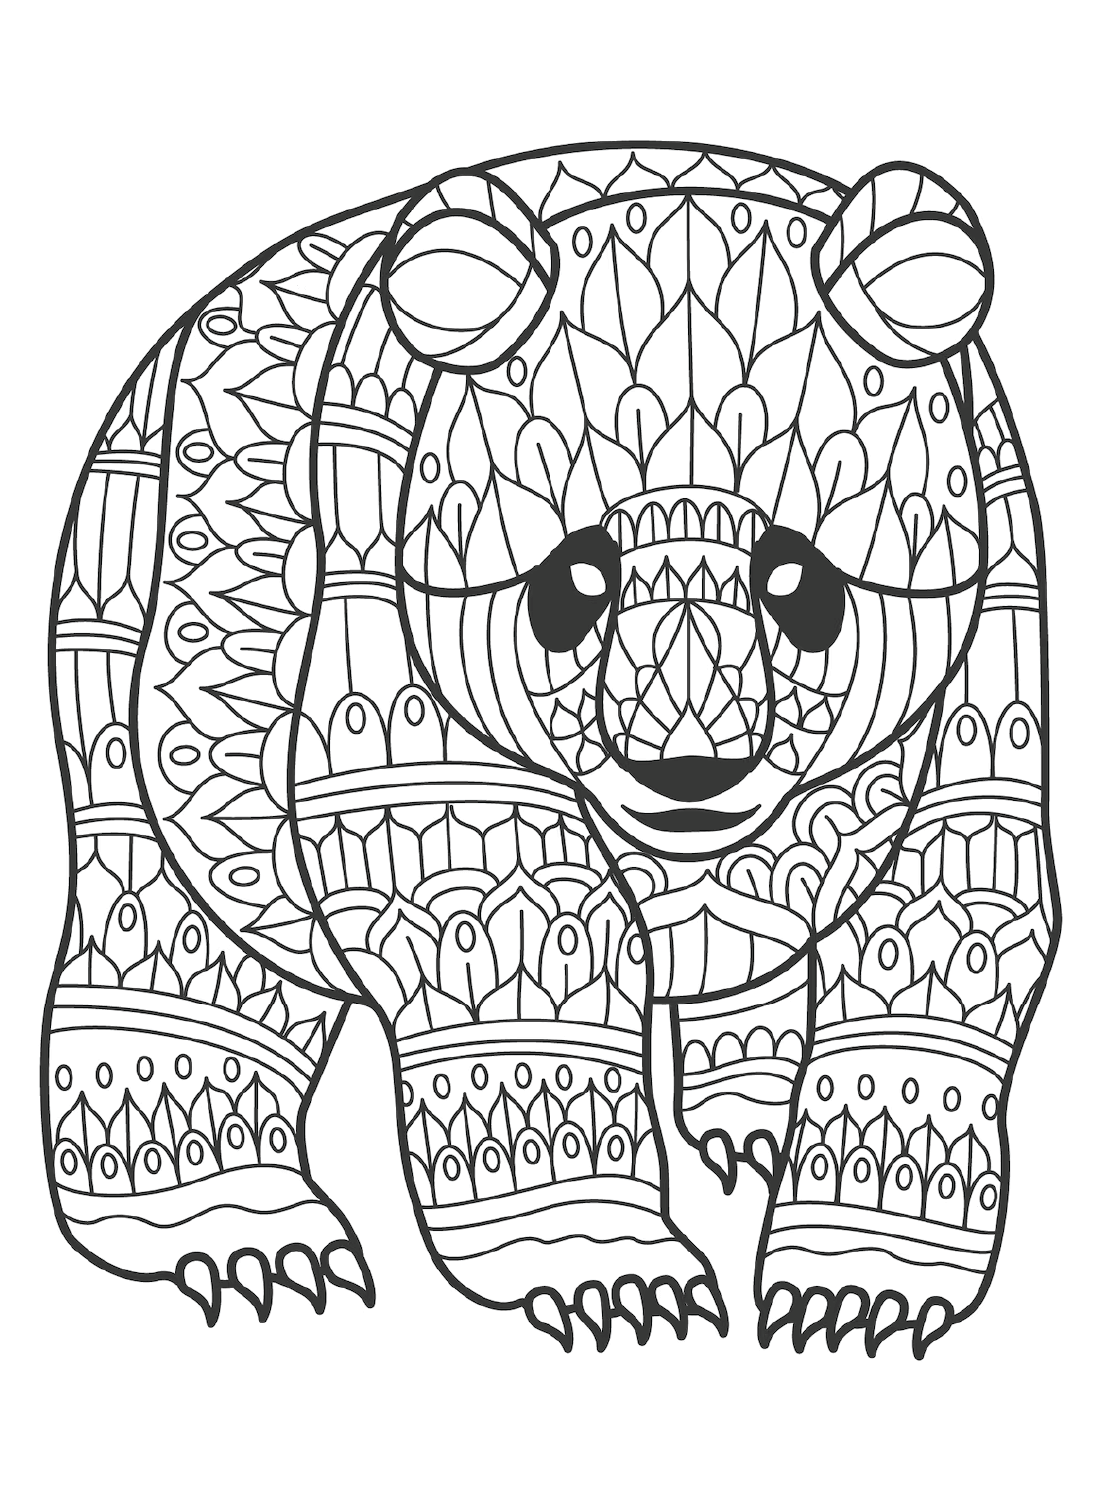 Zentangle bear coloring page